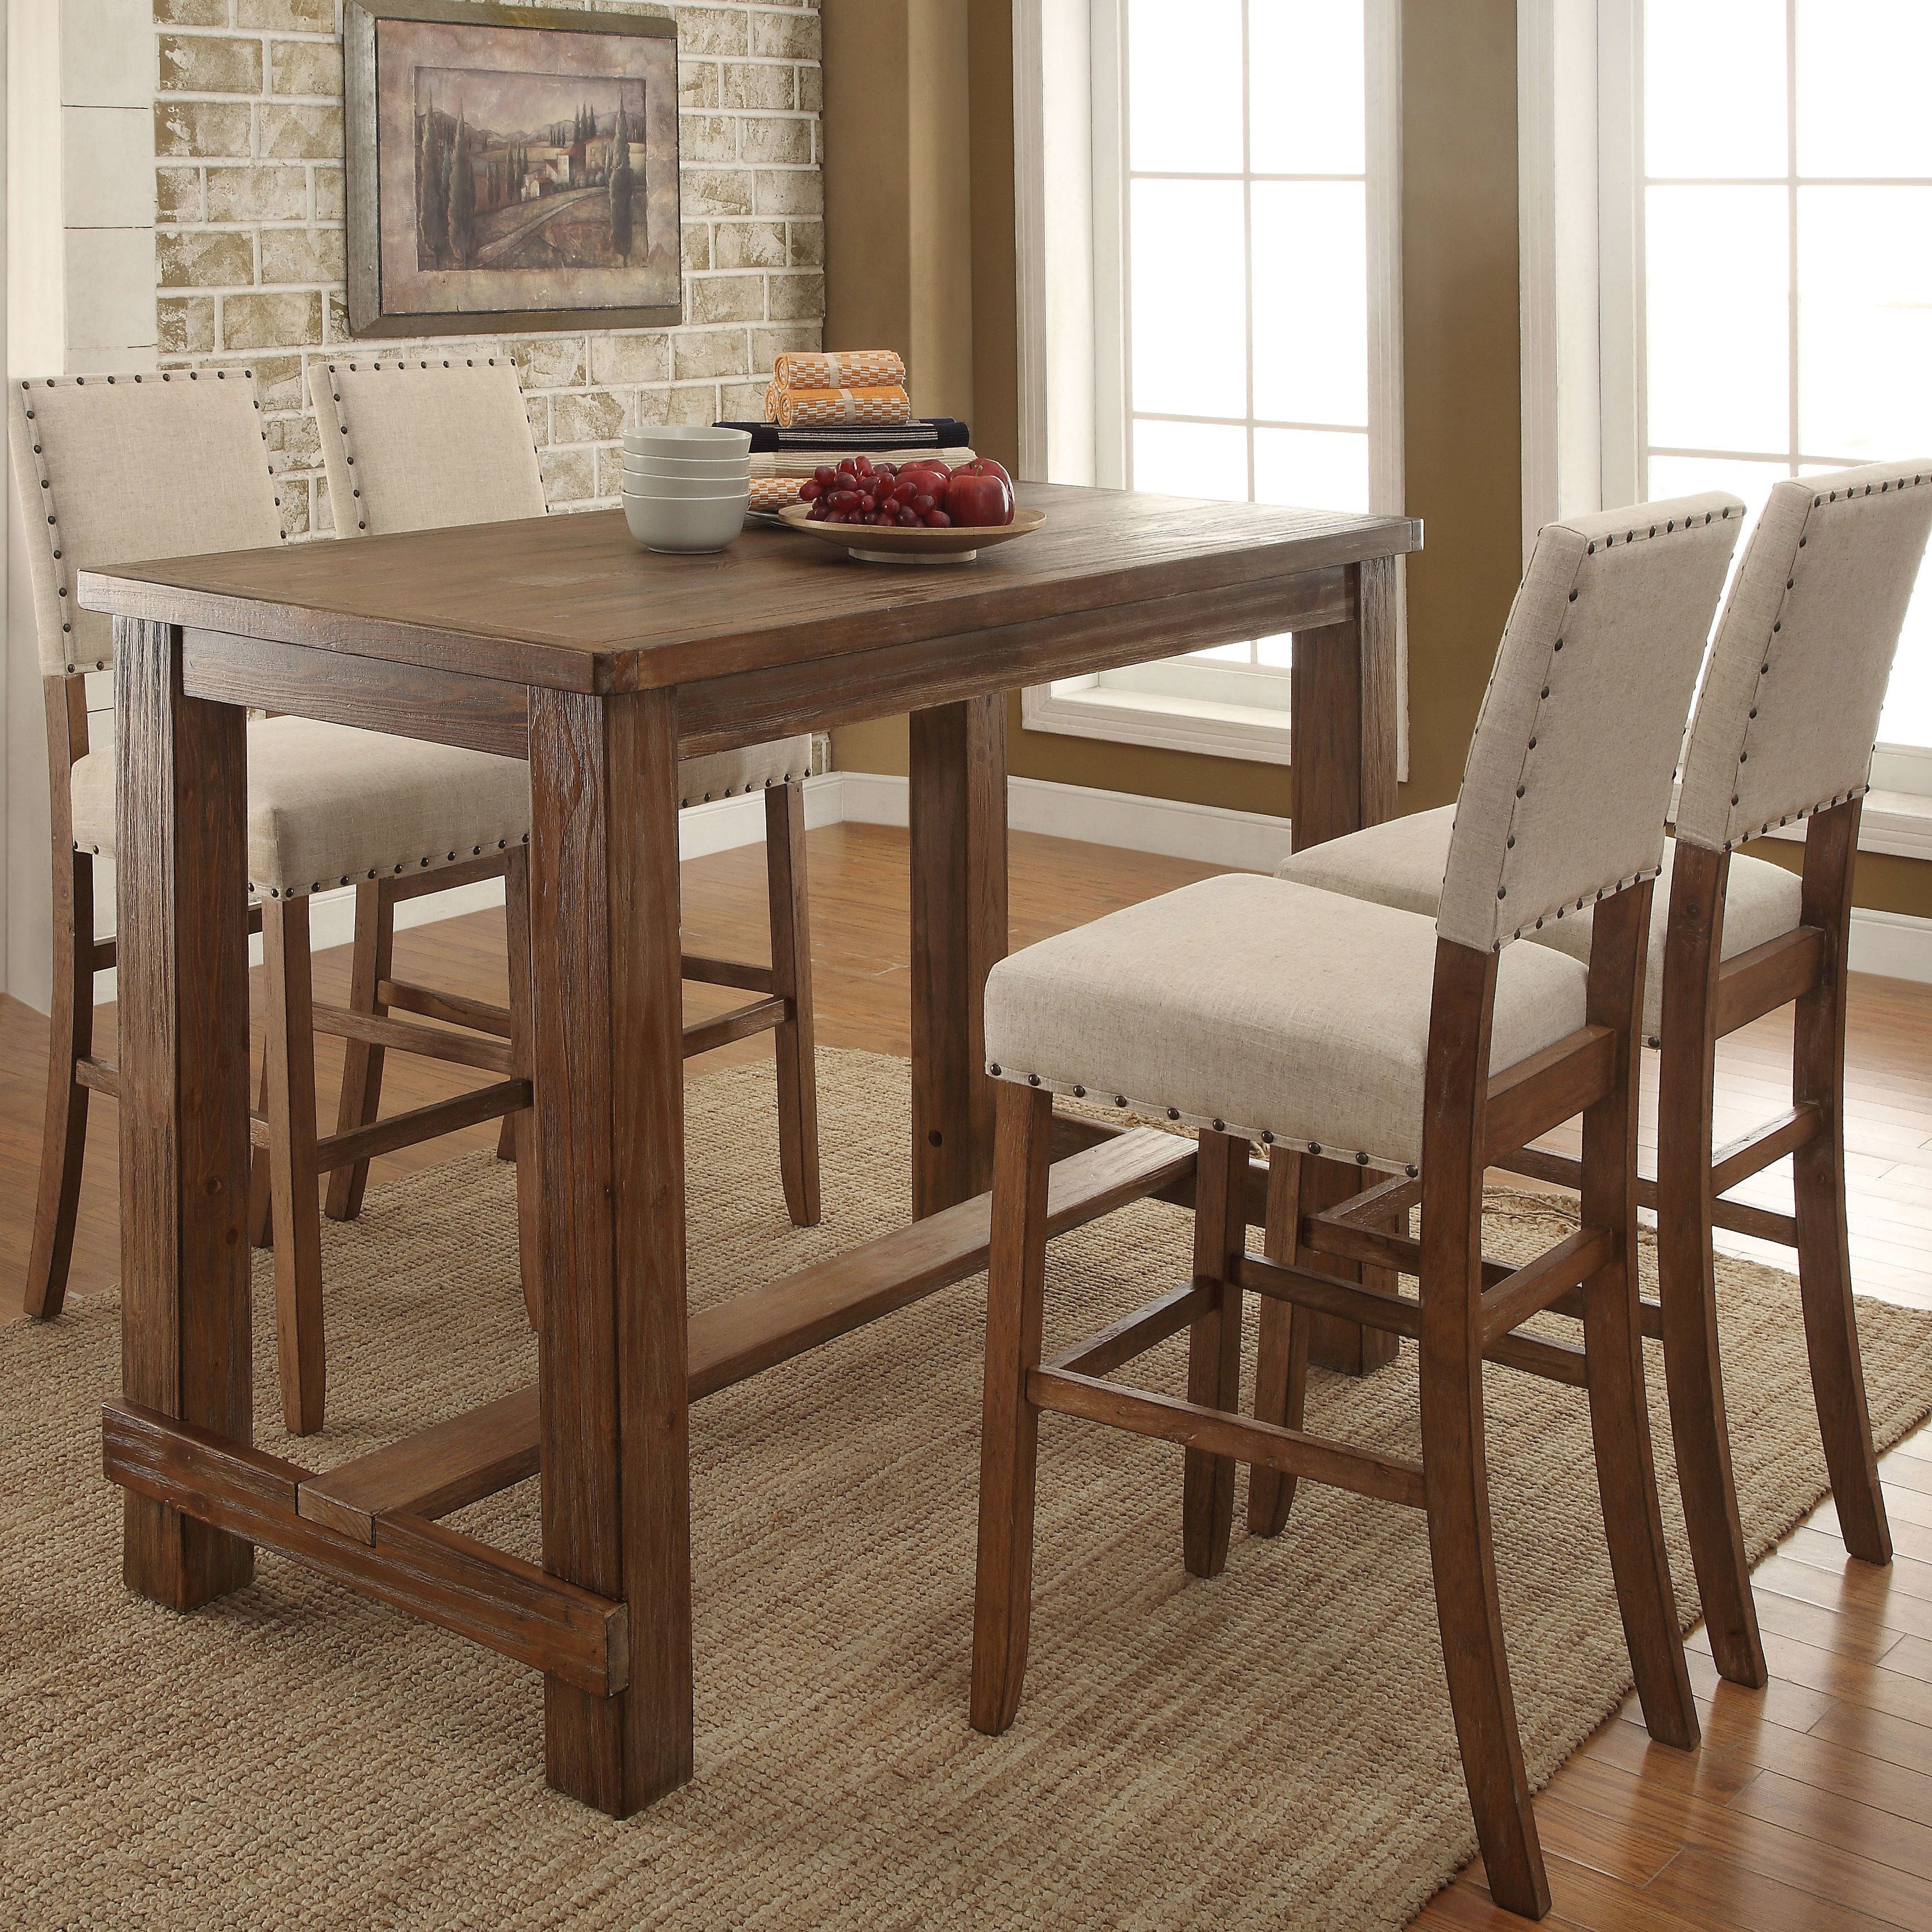 Orth 5 Piece Counter Height Dining Set & Reviews (View 14 of 20)